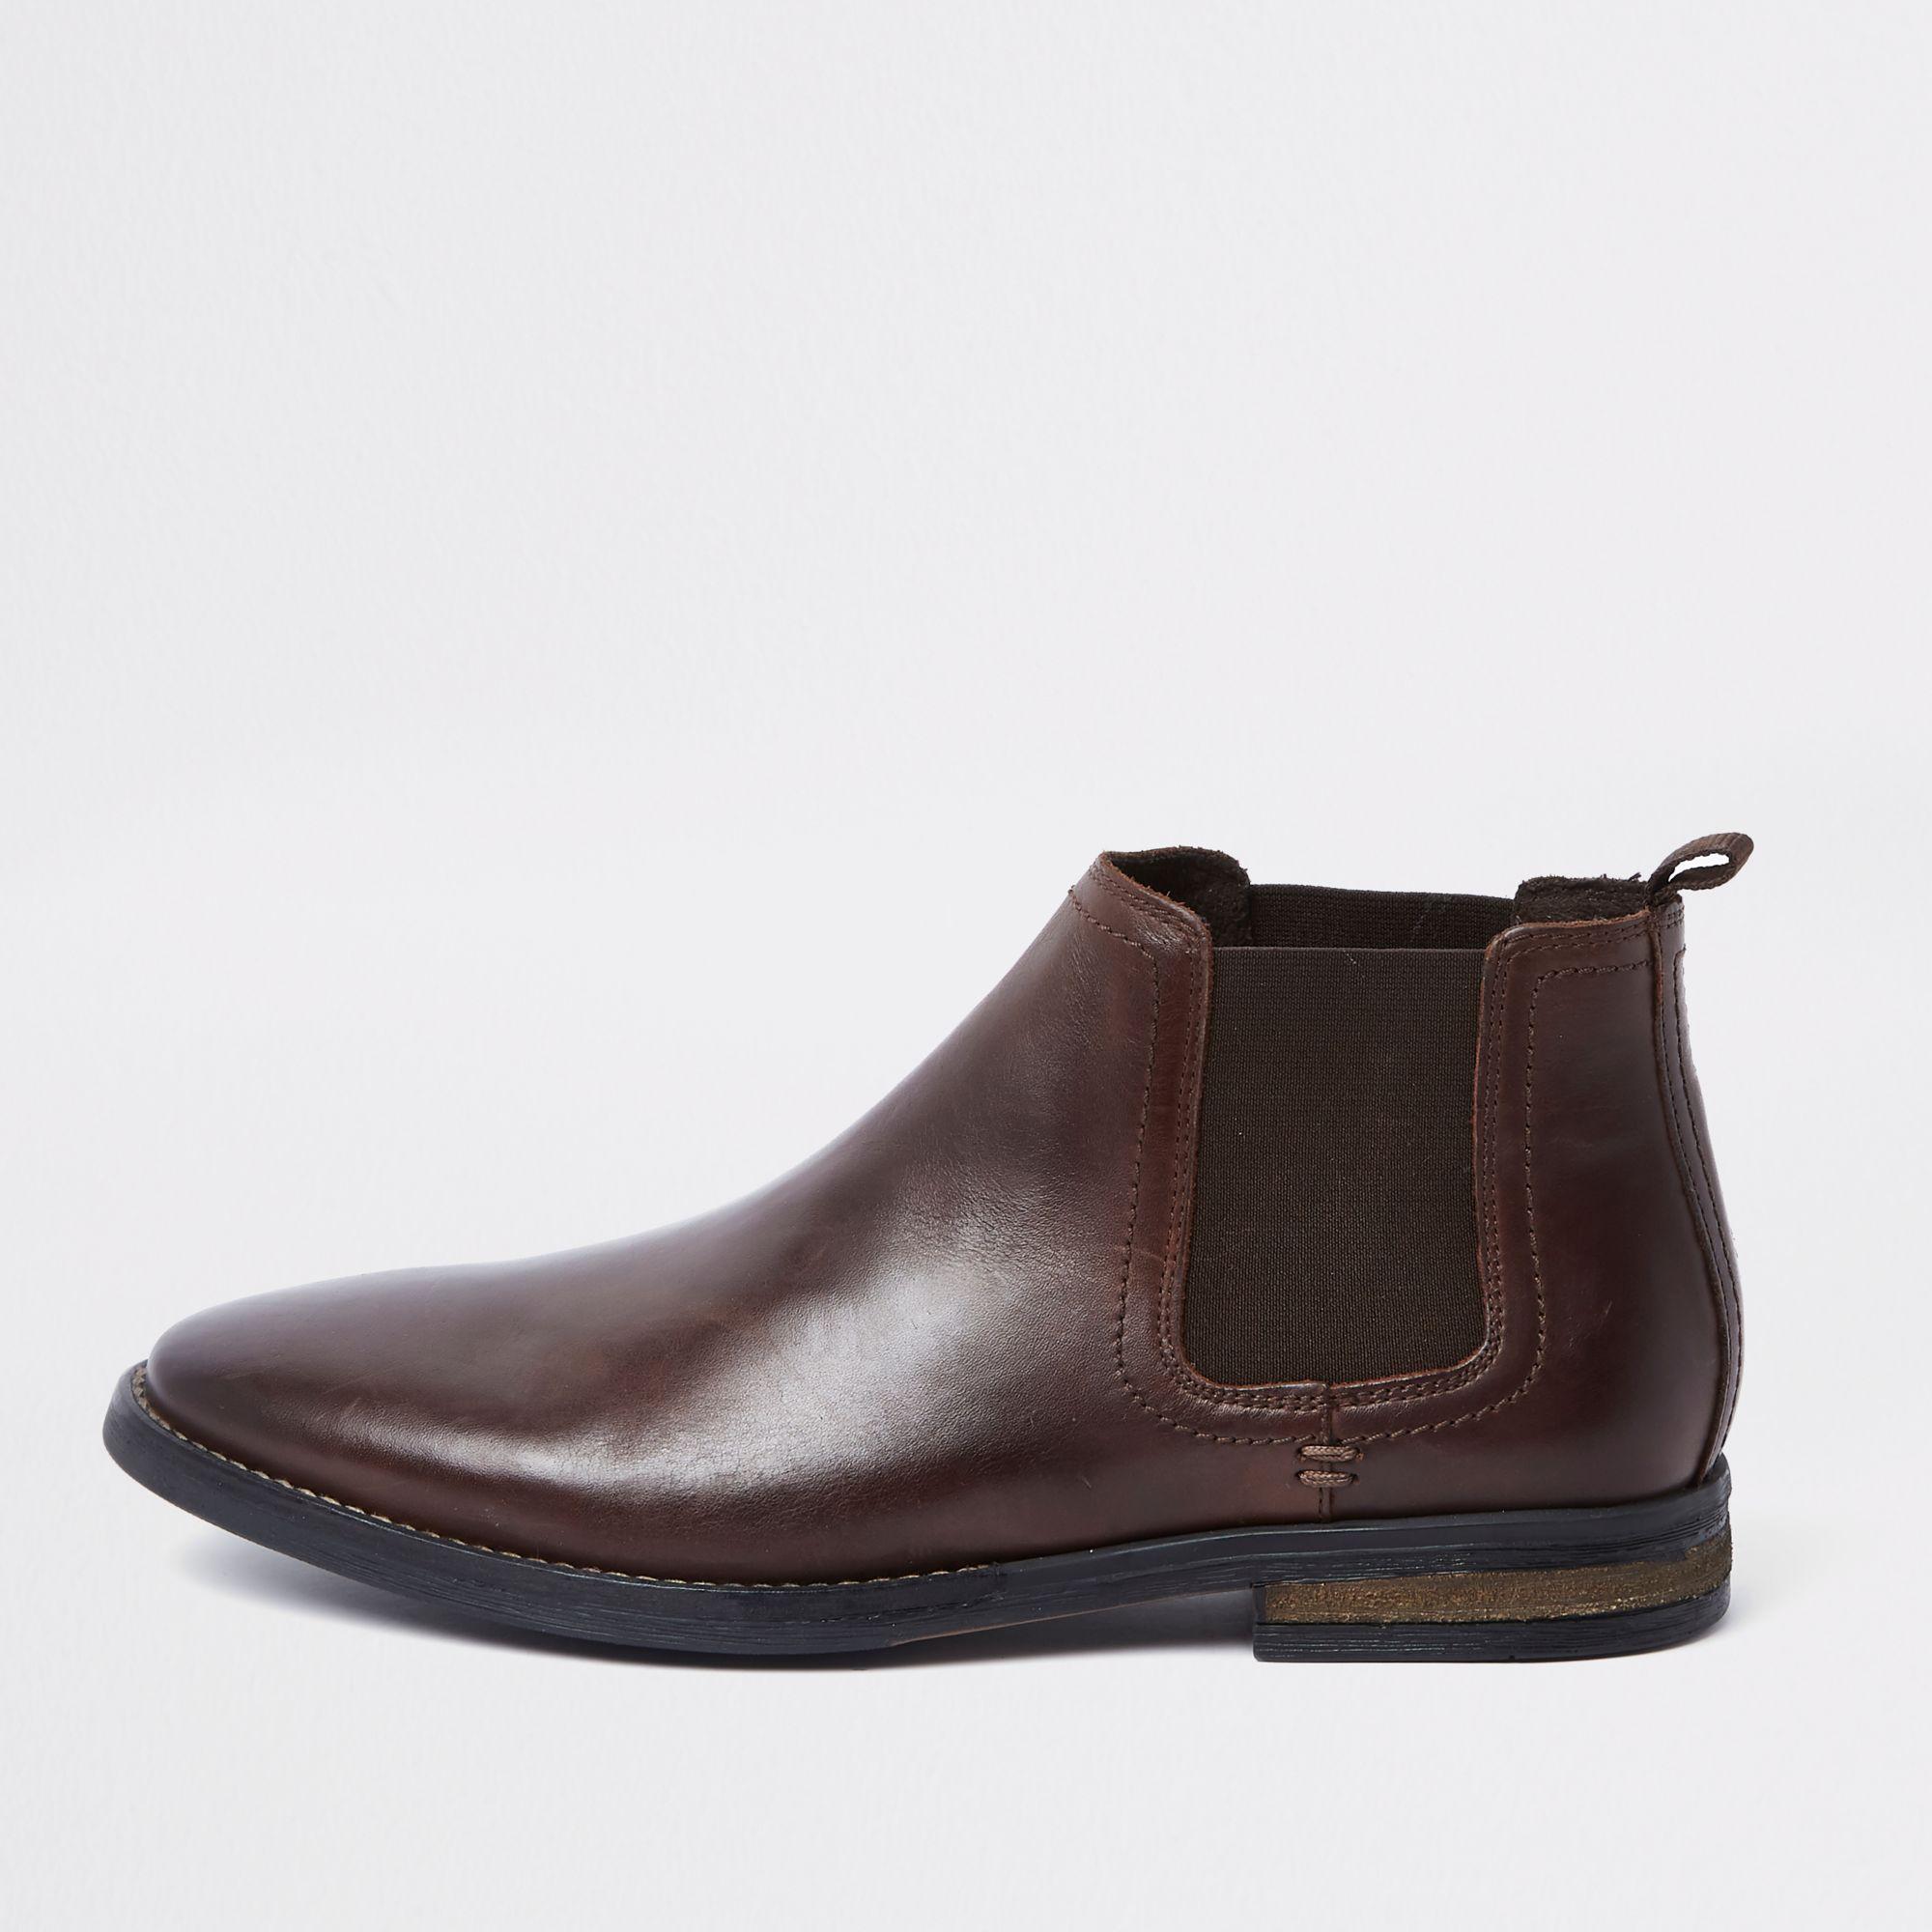 River Island Dark Leather Chelsea Boots in Brown for Men - Lyst